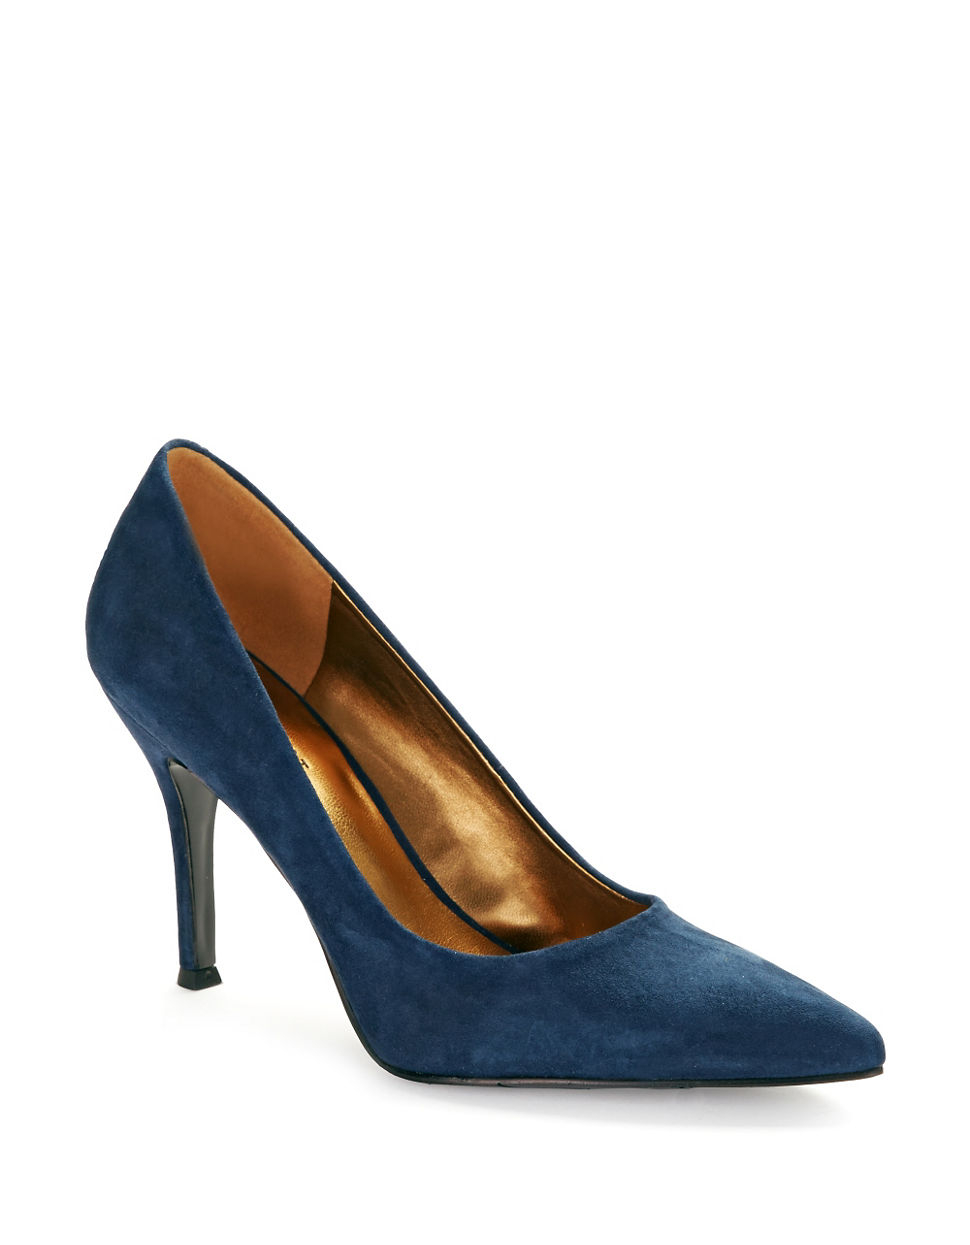 Nine West Flax Leather Pumps in Blue (NAVY) | Lyst